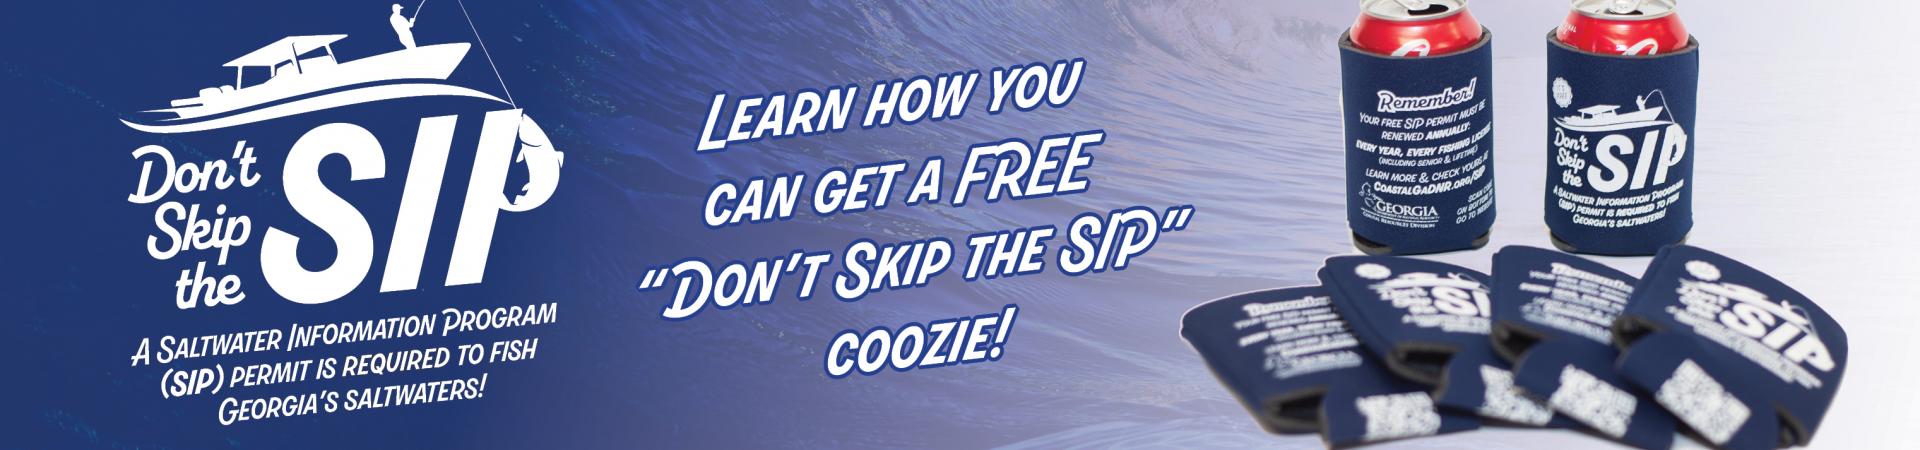 Don't Skip the SIP!